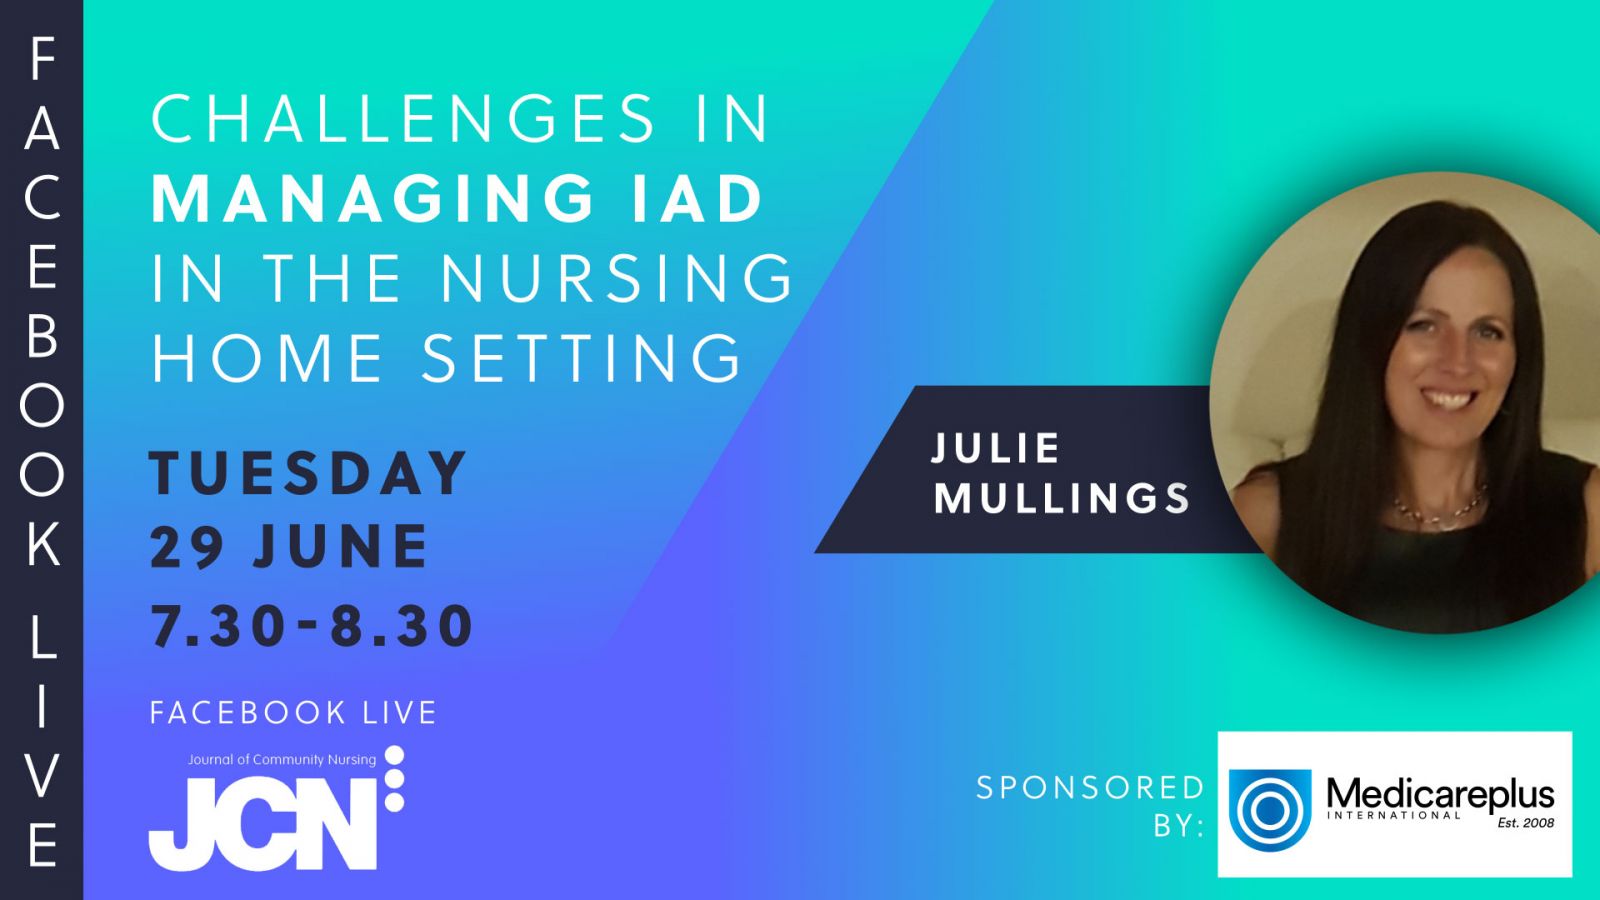 Facebook Live: Challenges in managing IAD in the nursing home setting - Videos